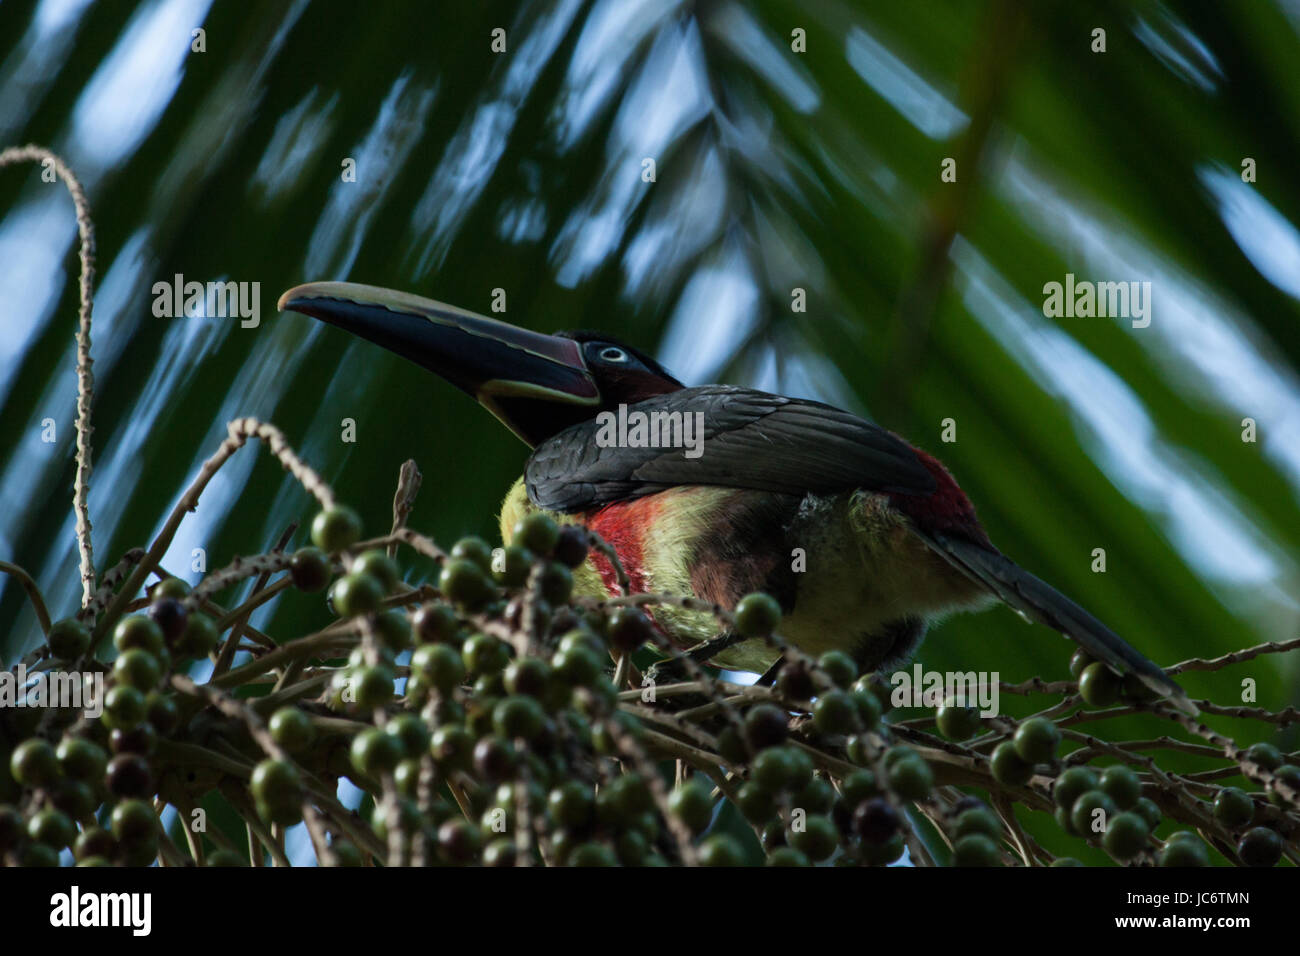 Colorful bird: Green-billed toucan (Ramphastos dicolorus), or red-breasted toucan. Stock Photo